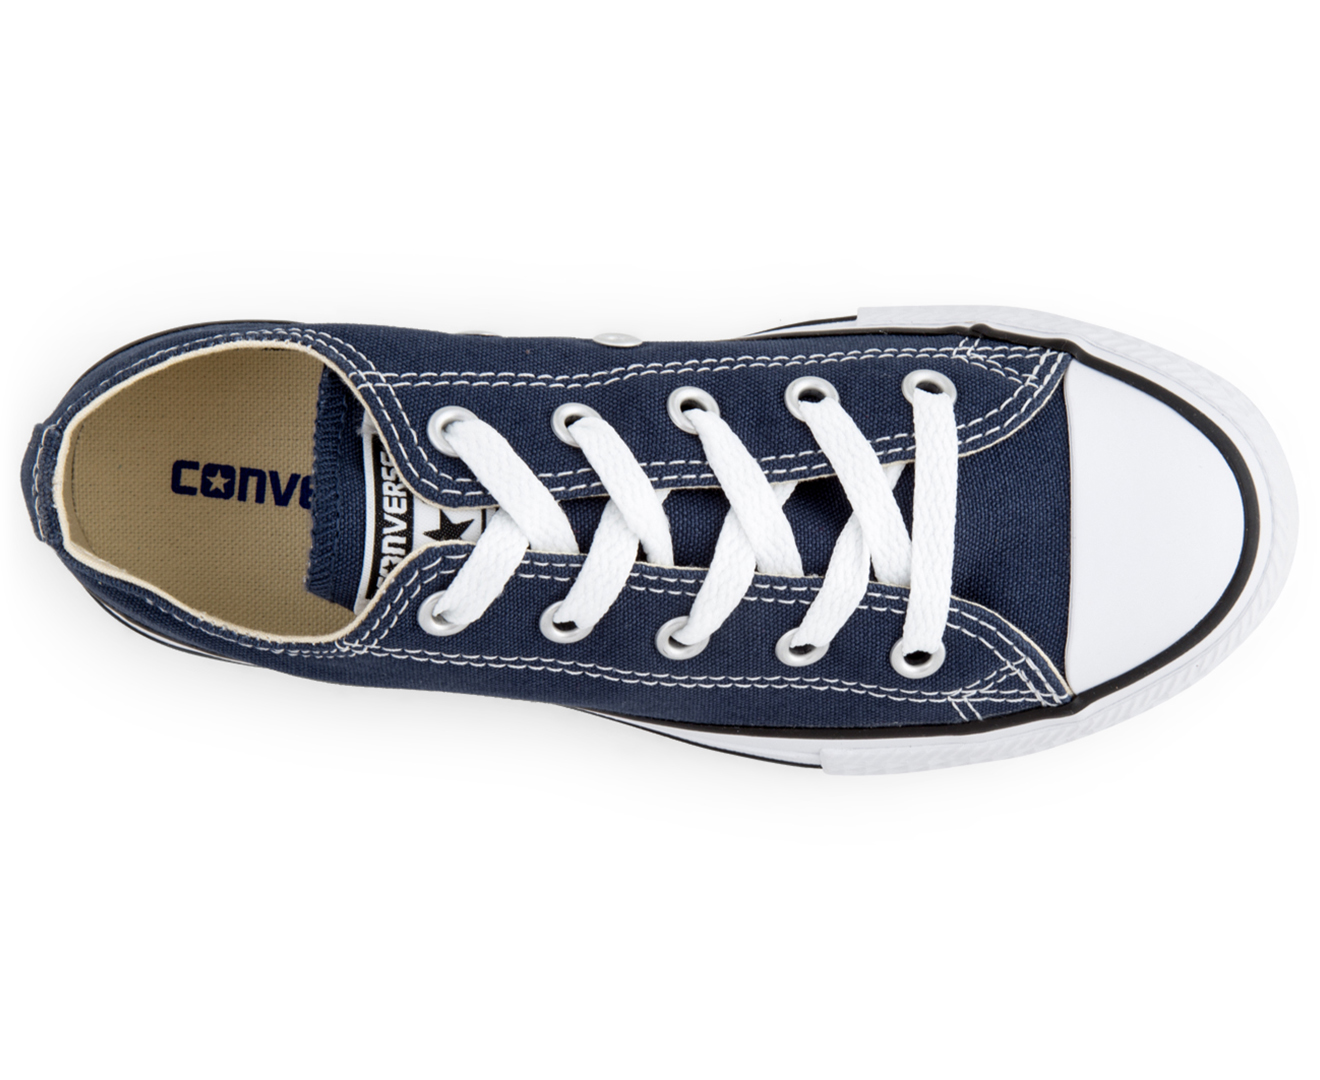 Converse Kids' Chuck Taylor All Star Low Top Sneakers - Navy | Catch.co.nz